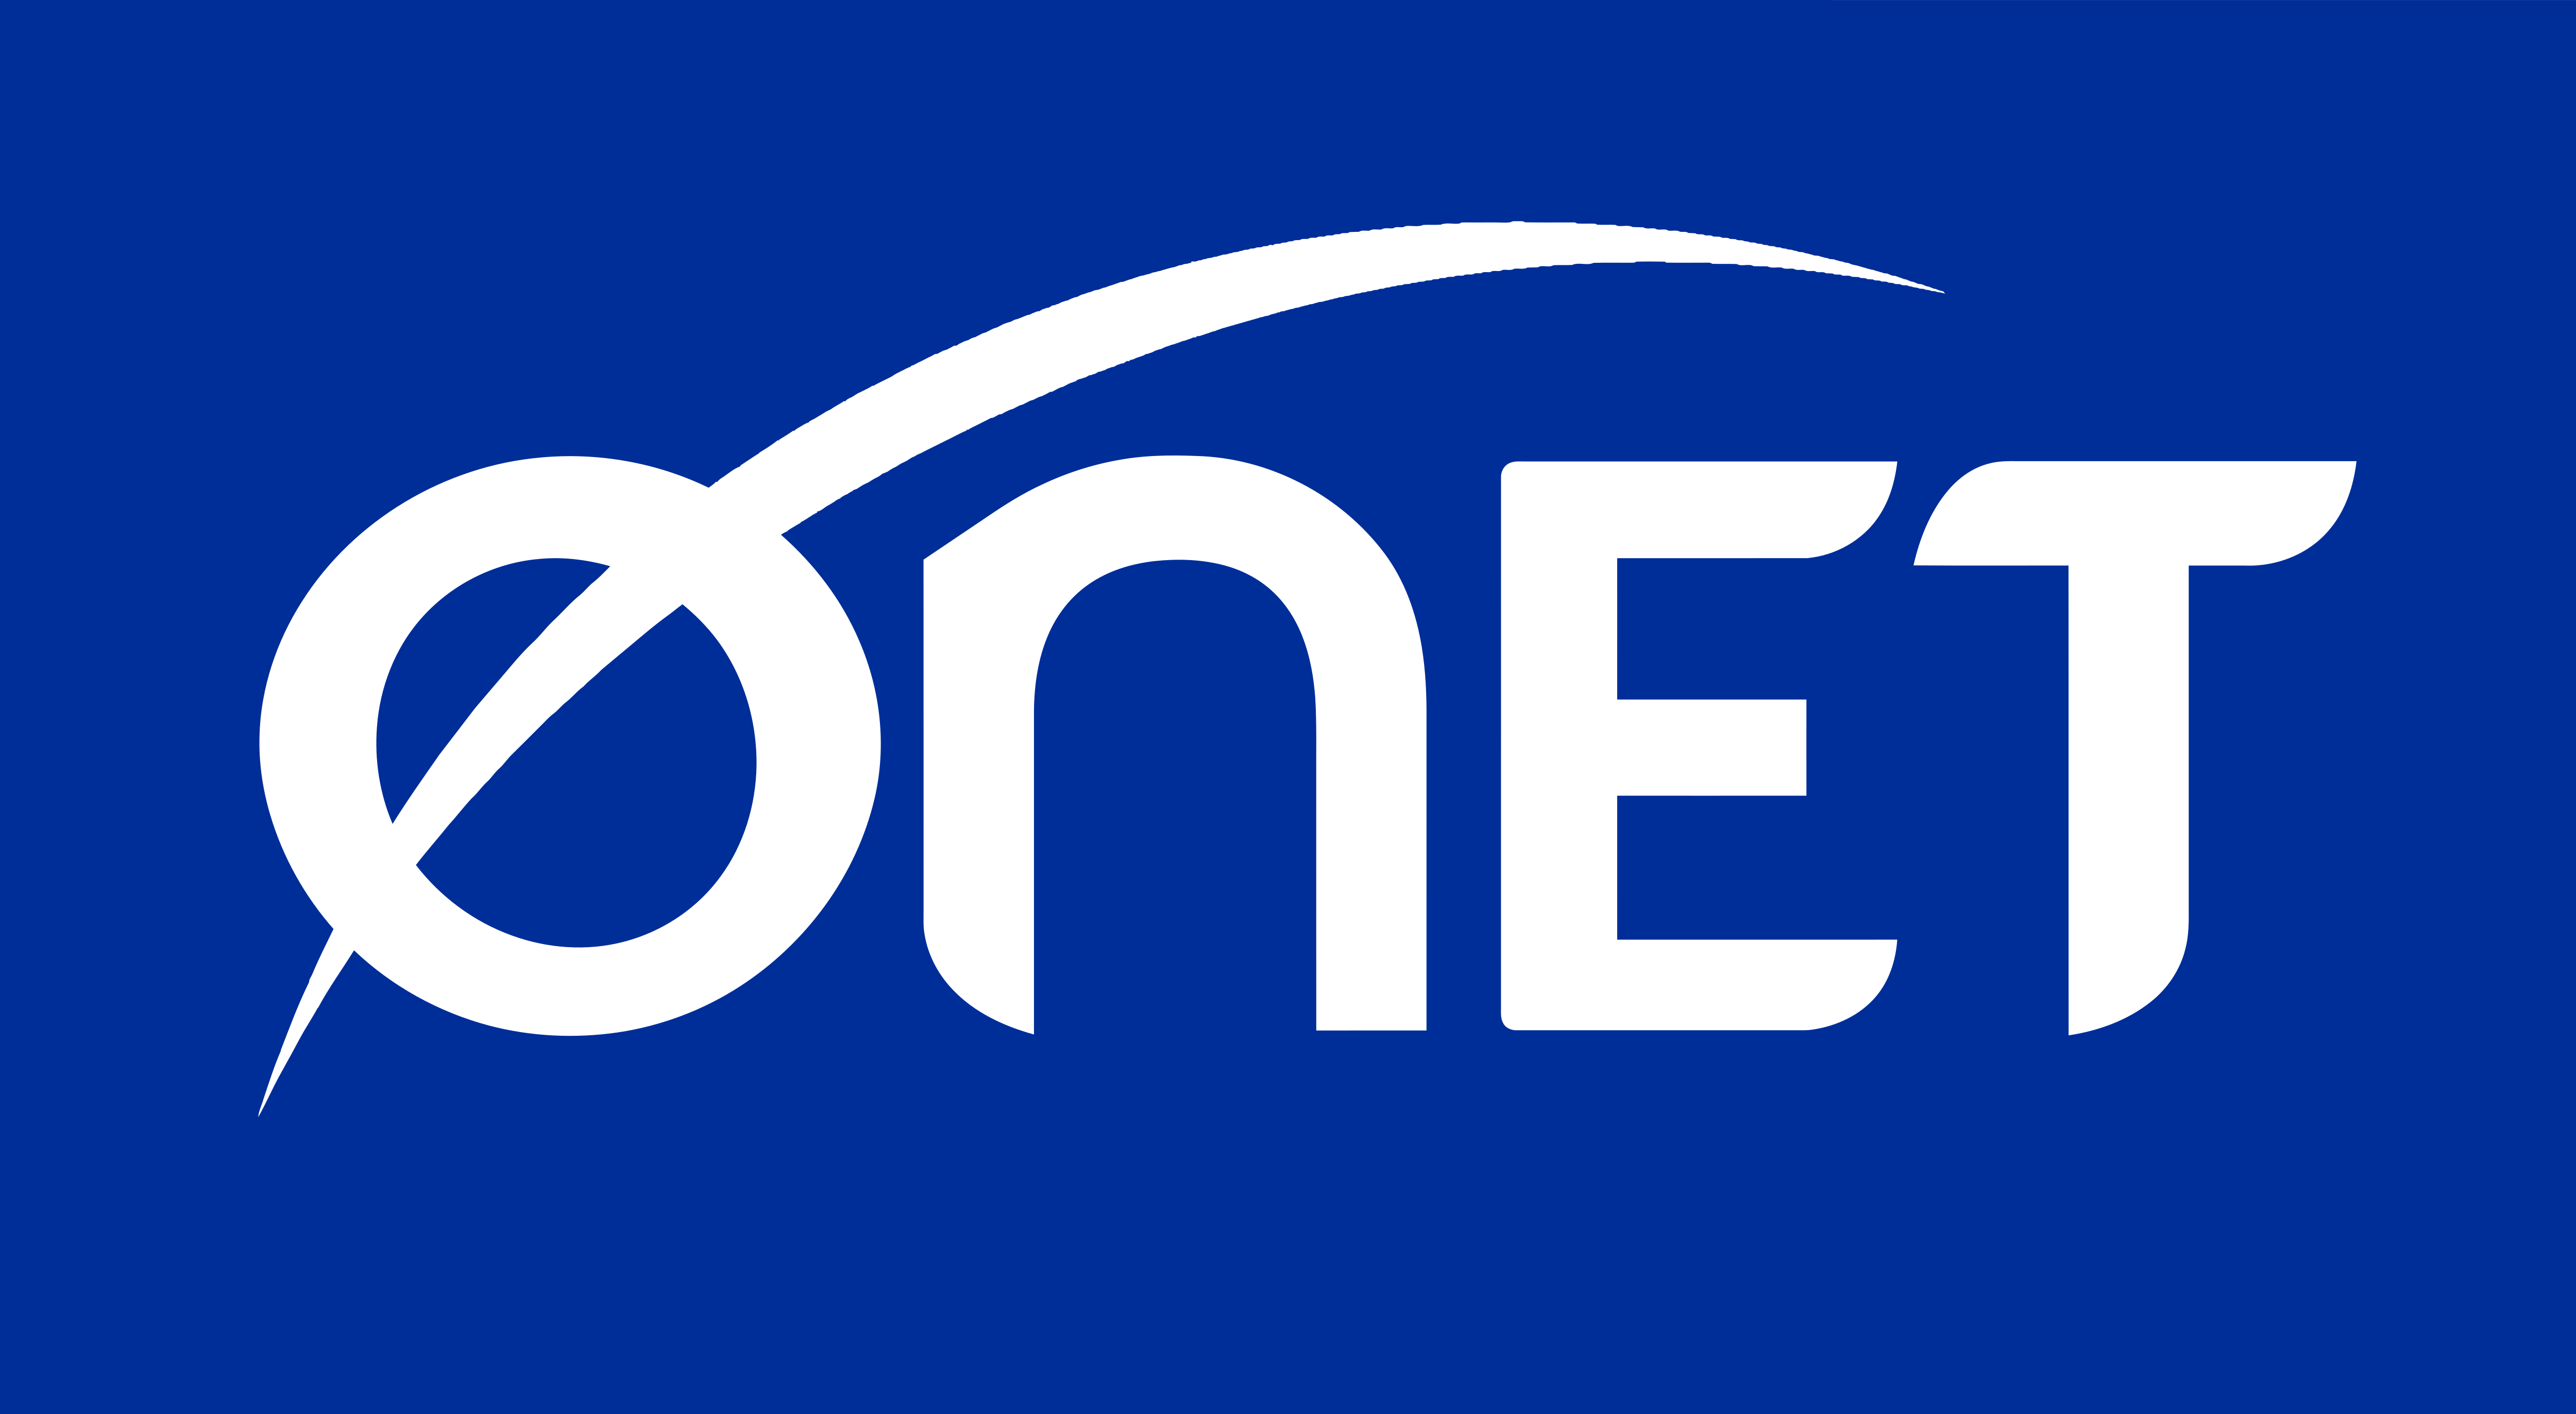 Groupe Onet – Logos Download